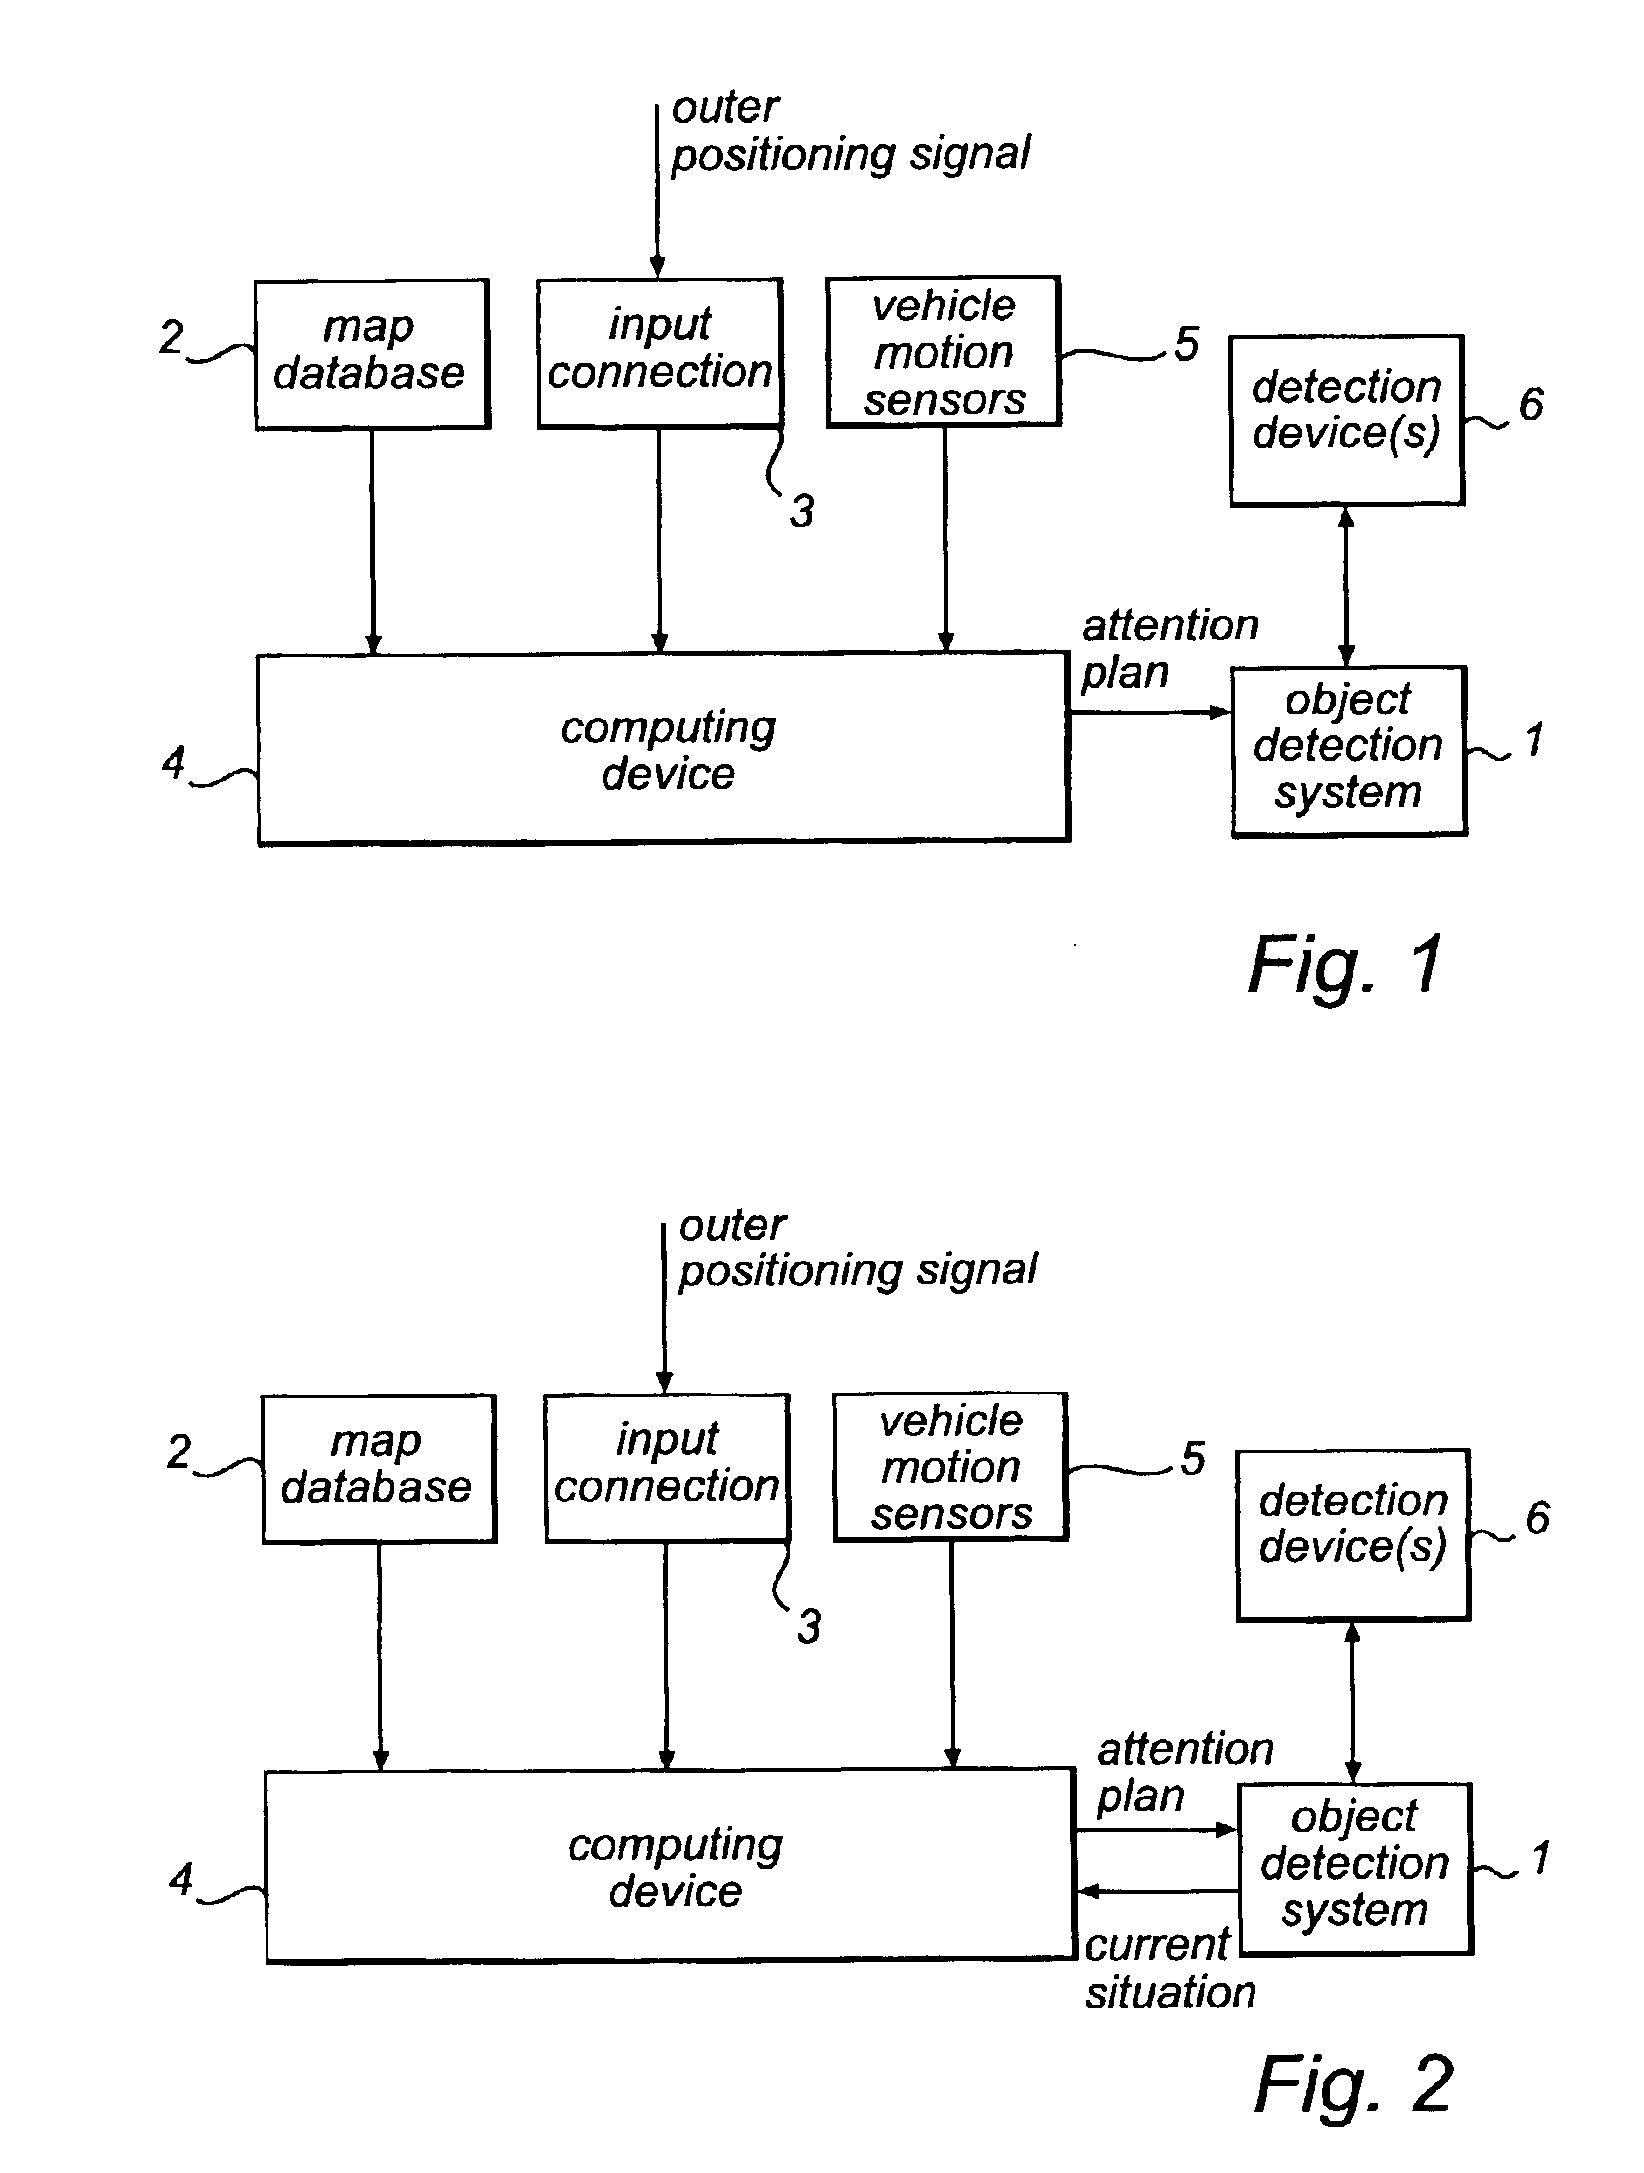 System and method for controlling an object detection system of a vehicle